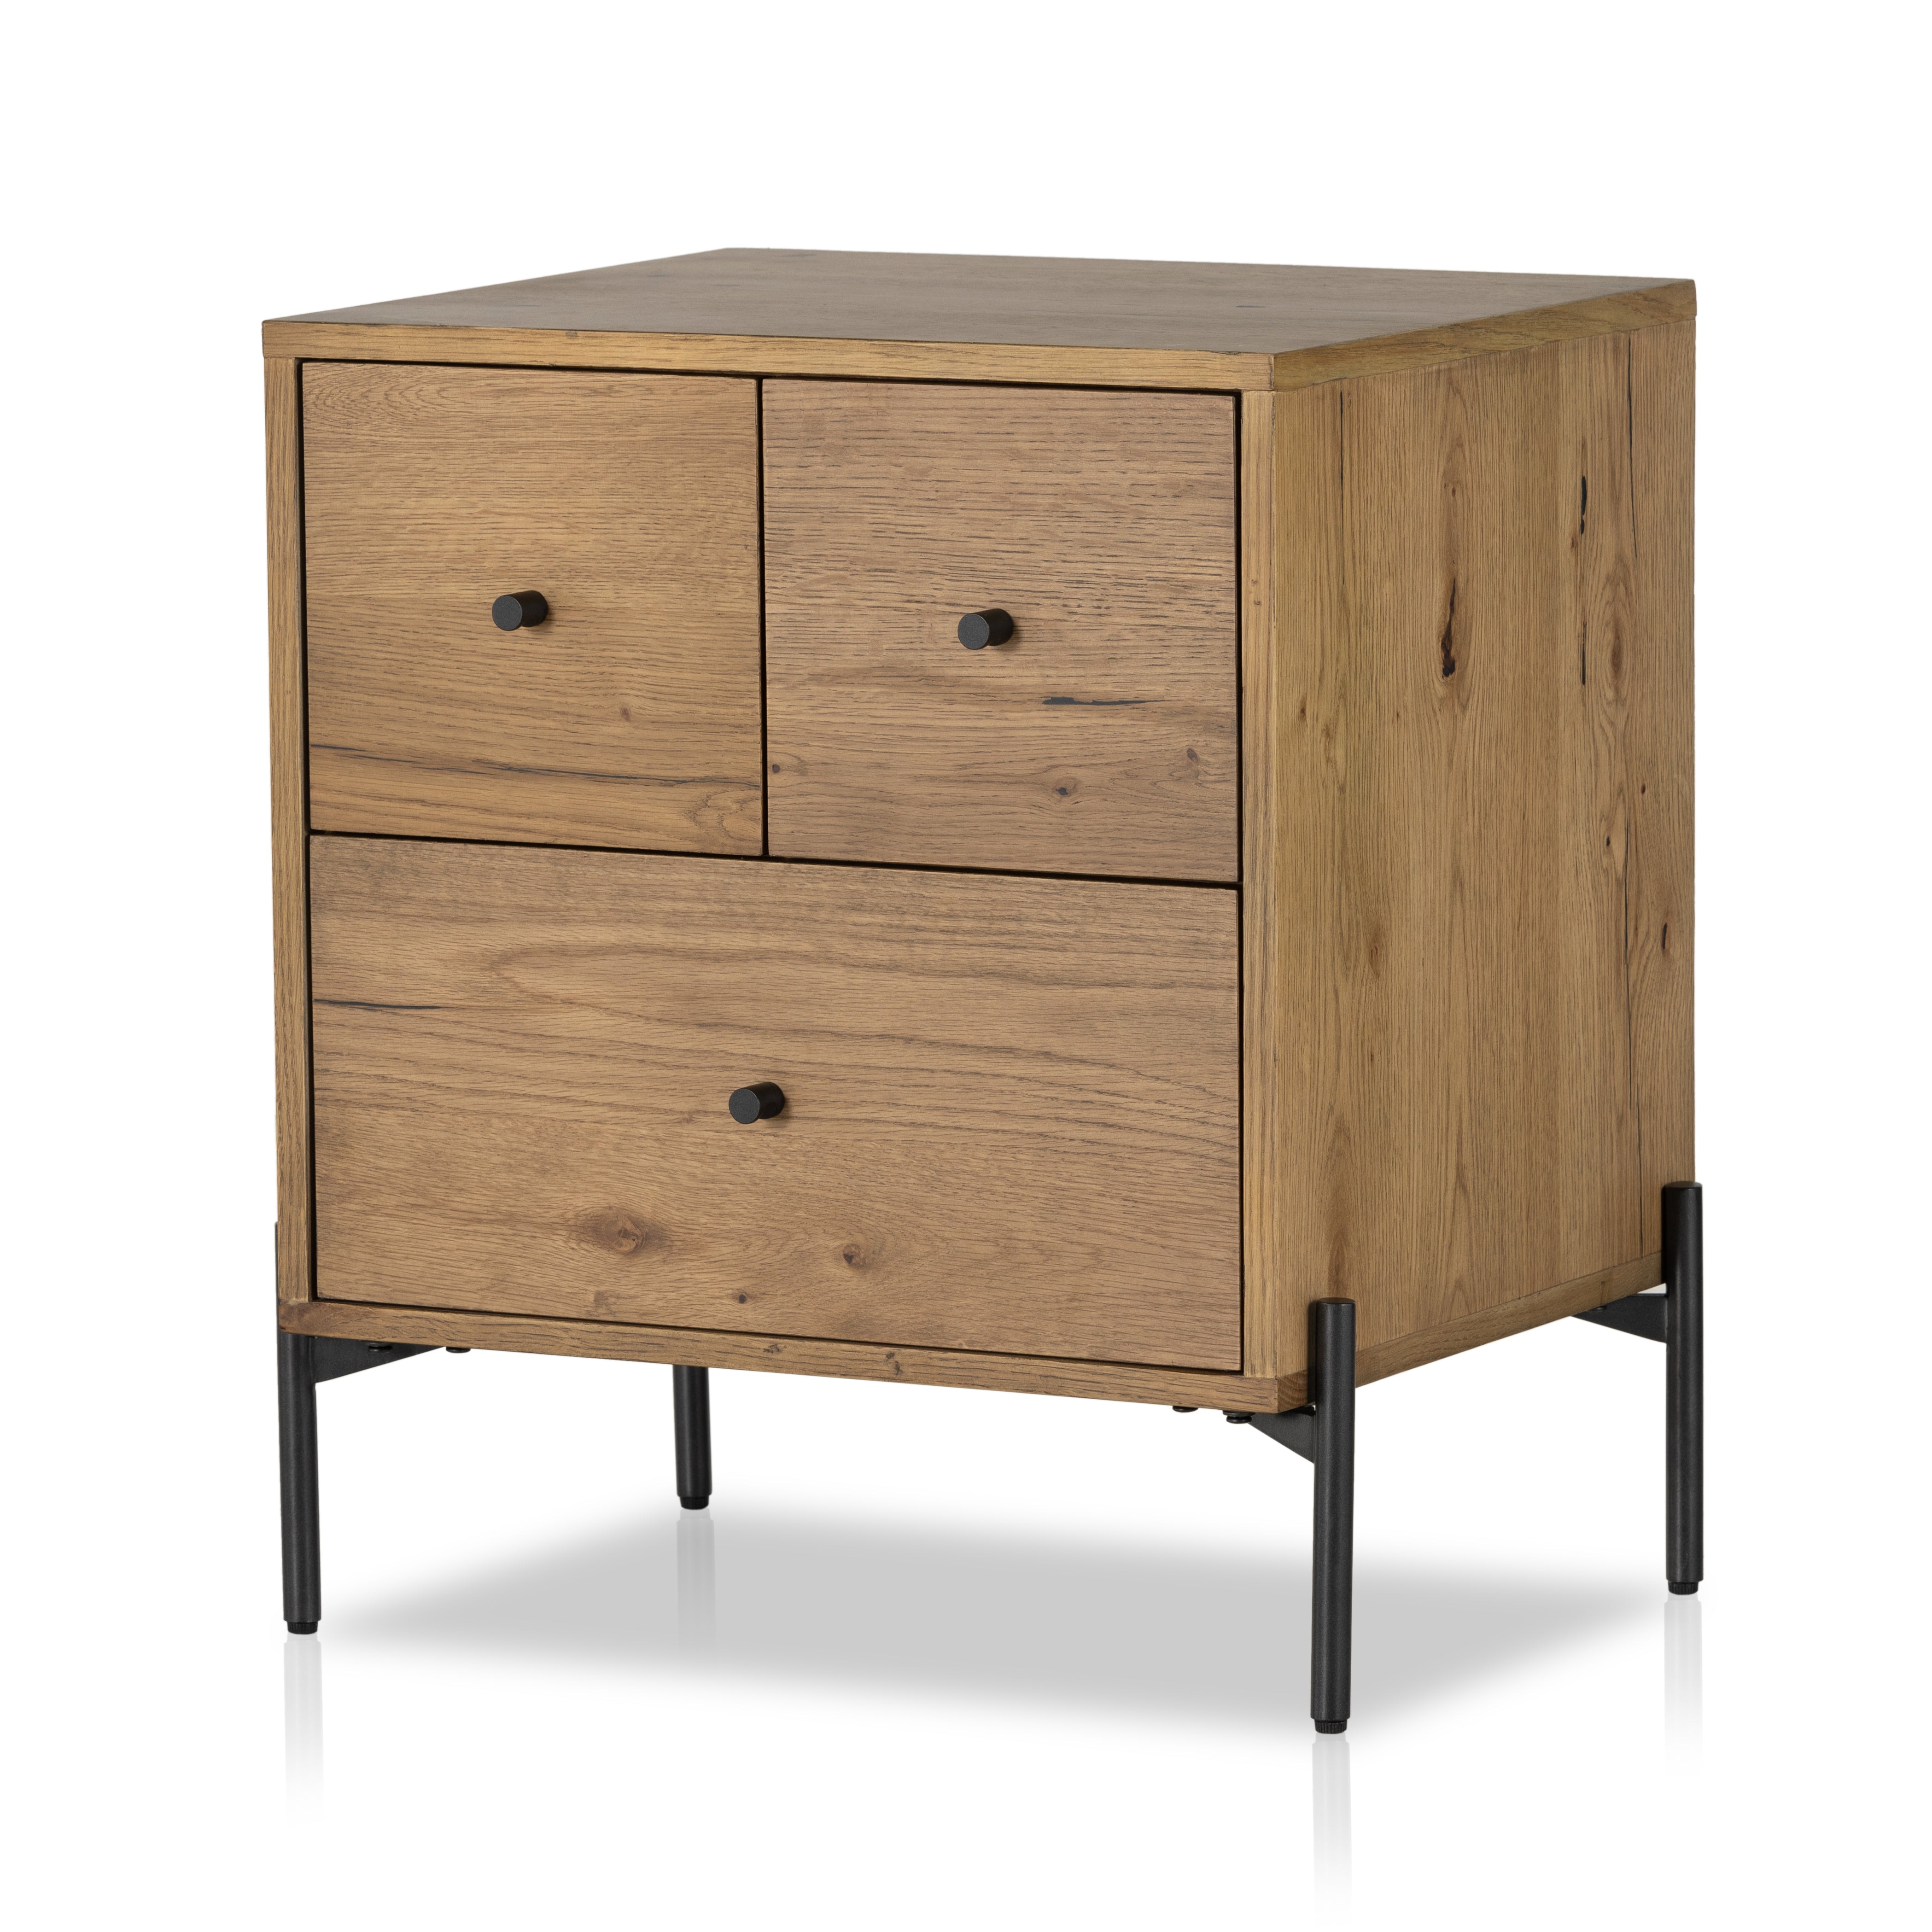 The Eaton Amber Oak Resin Nightstand boasts a classic, timeless style with its intricate details and warm oak finish. Crafted from durable resin, it's the perfect accent piece for your home. Amethyst Home provides interior design, new construction, custom furniture, and area rugs in the Kansas City metro area.